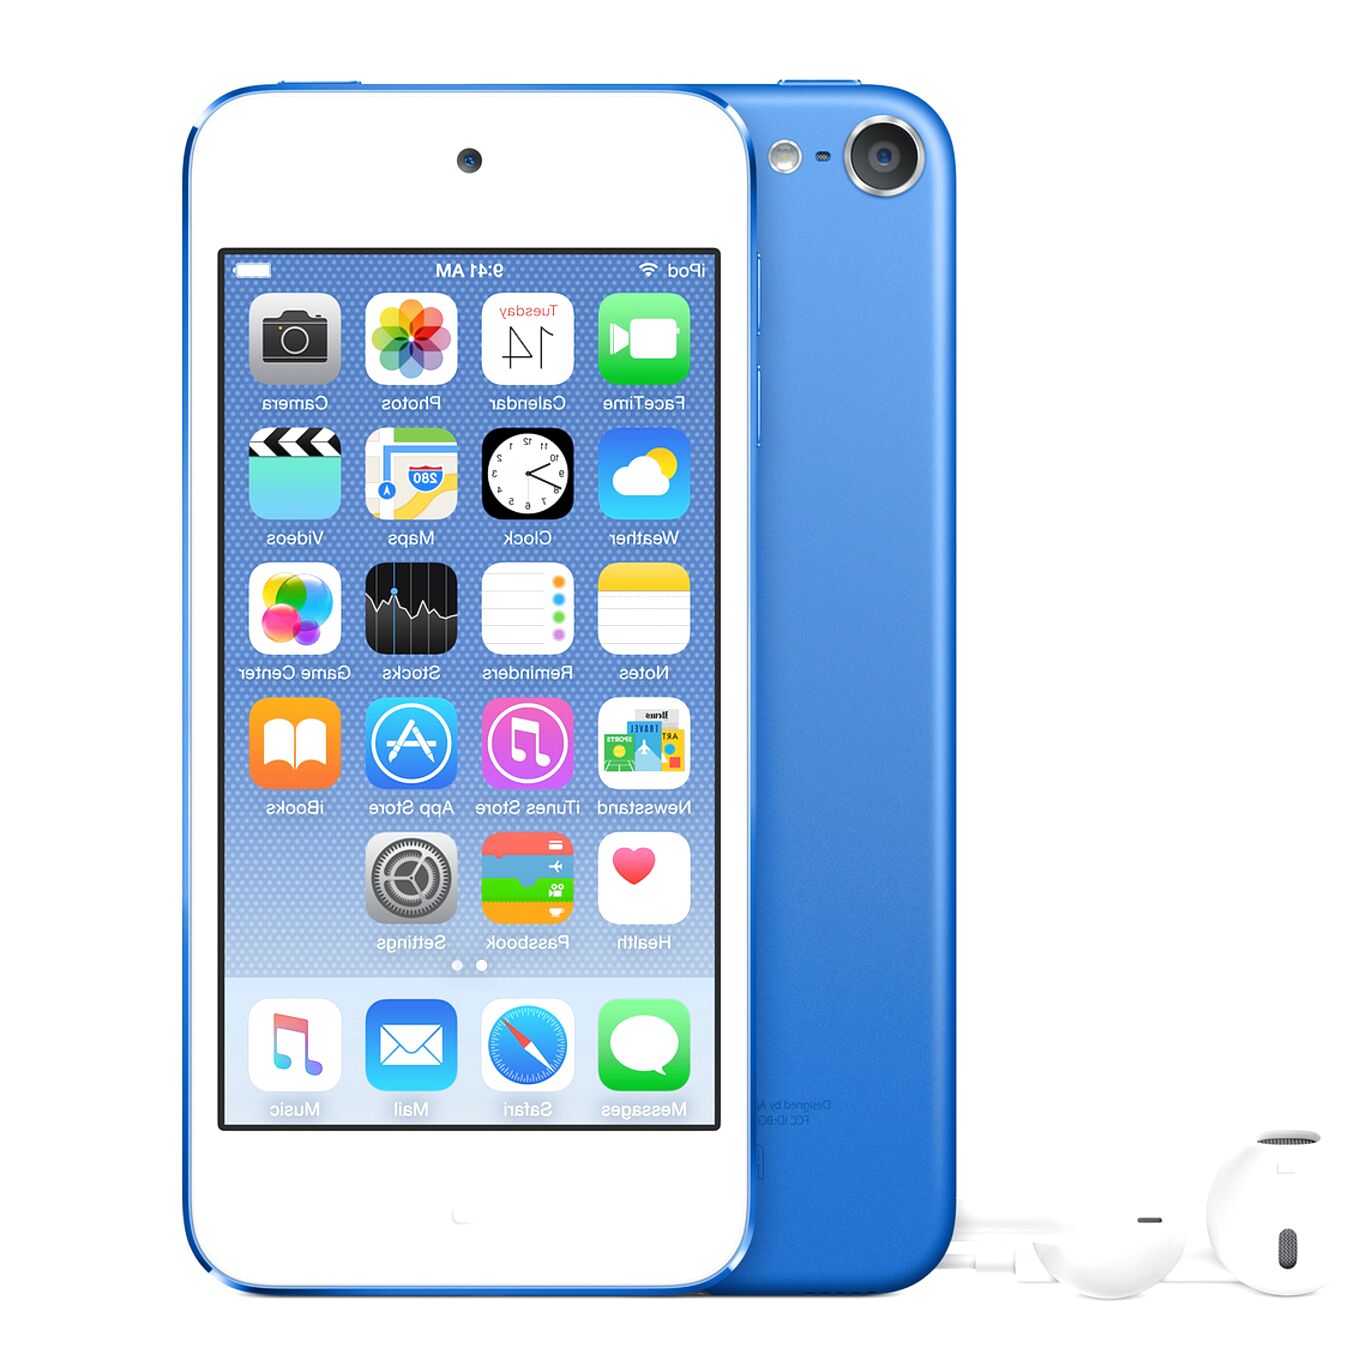 Ipod Touch 6Th Generation 32Gb for sale in UK  59 used Ipod Touch 6Th